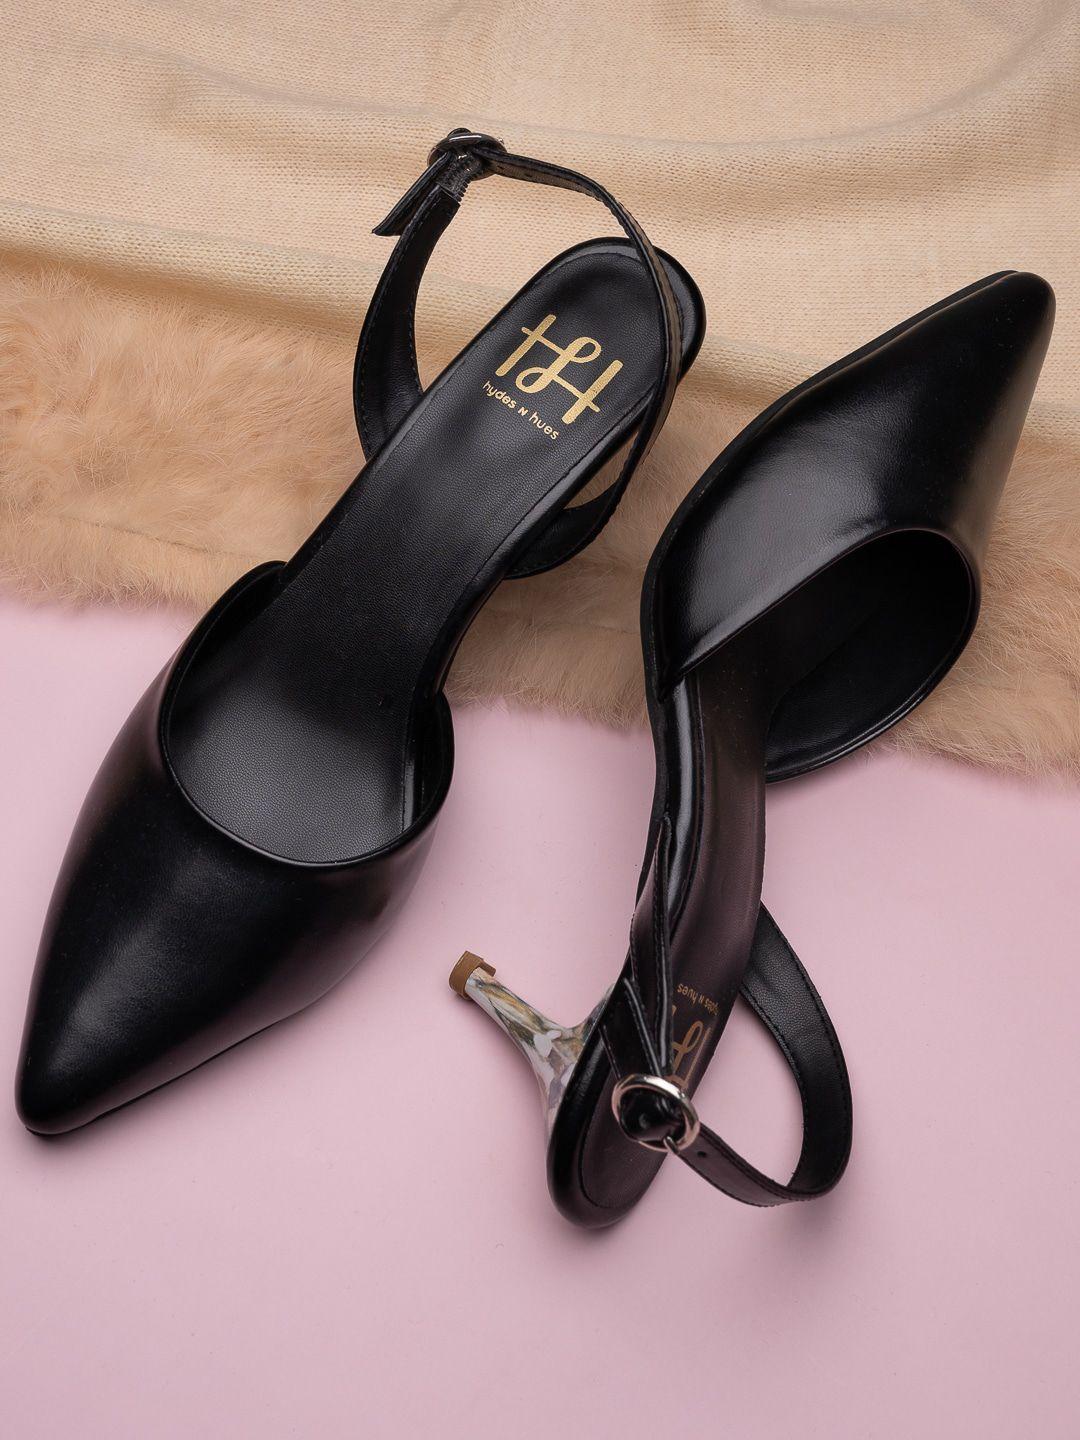 hydes n hues pointed toe kitten heel mules with buckles